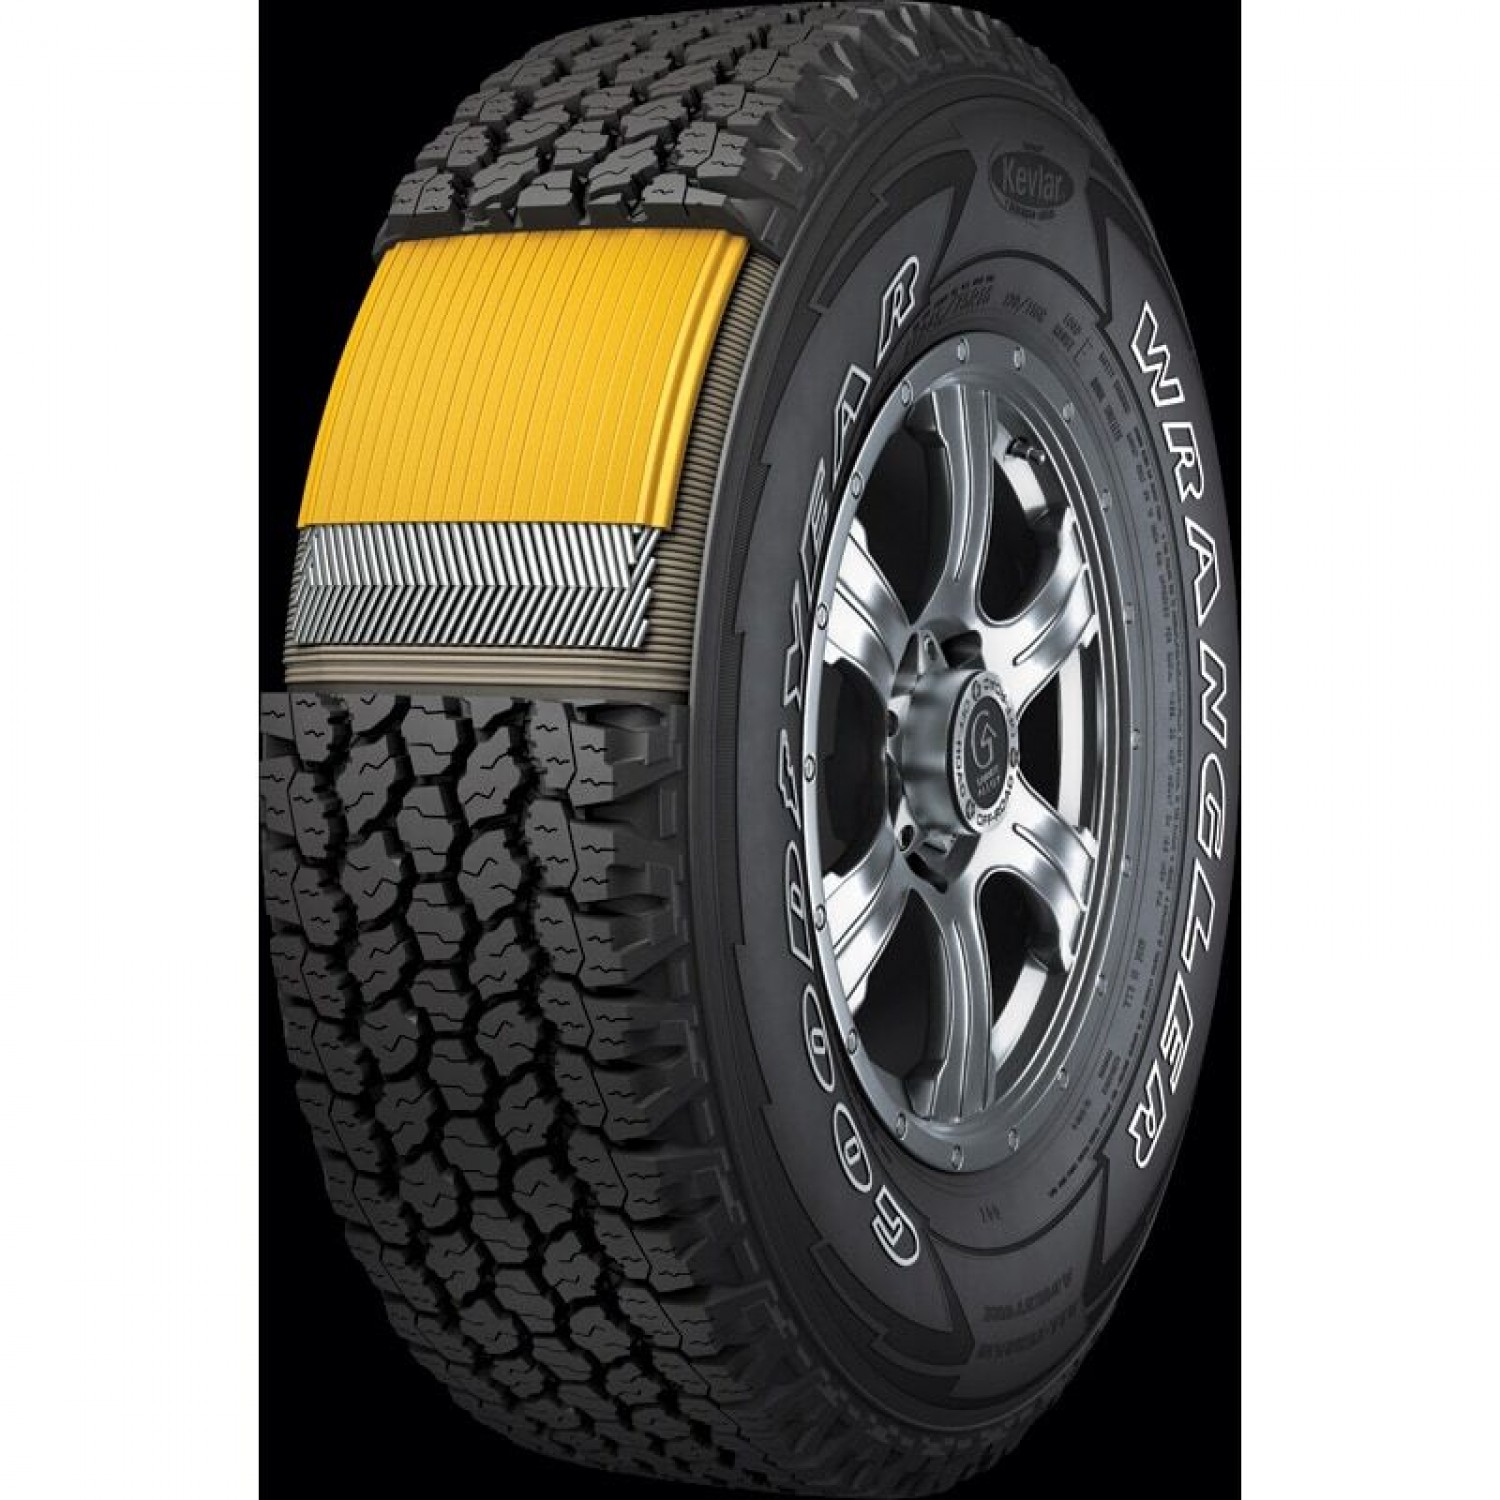 Goodyear Wrangler AT Adventure With Kevlar Outlined White Letters Tire ( LT275/65R18 123S) vzn121184